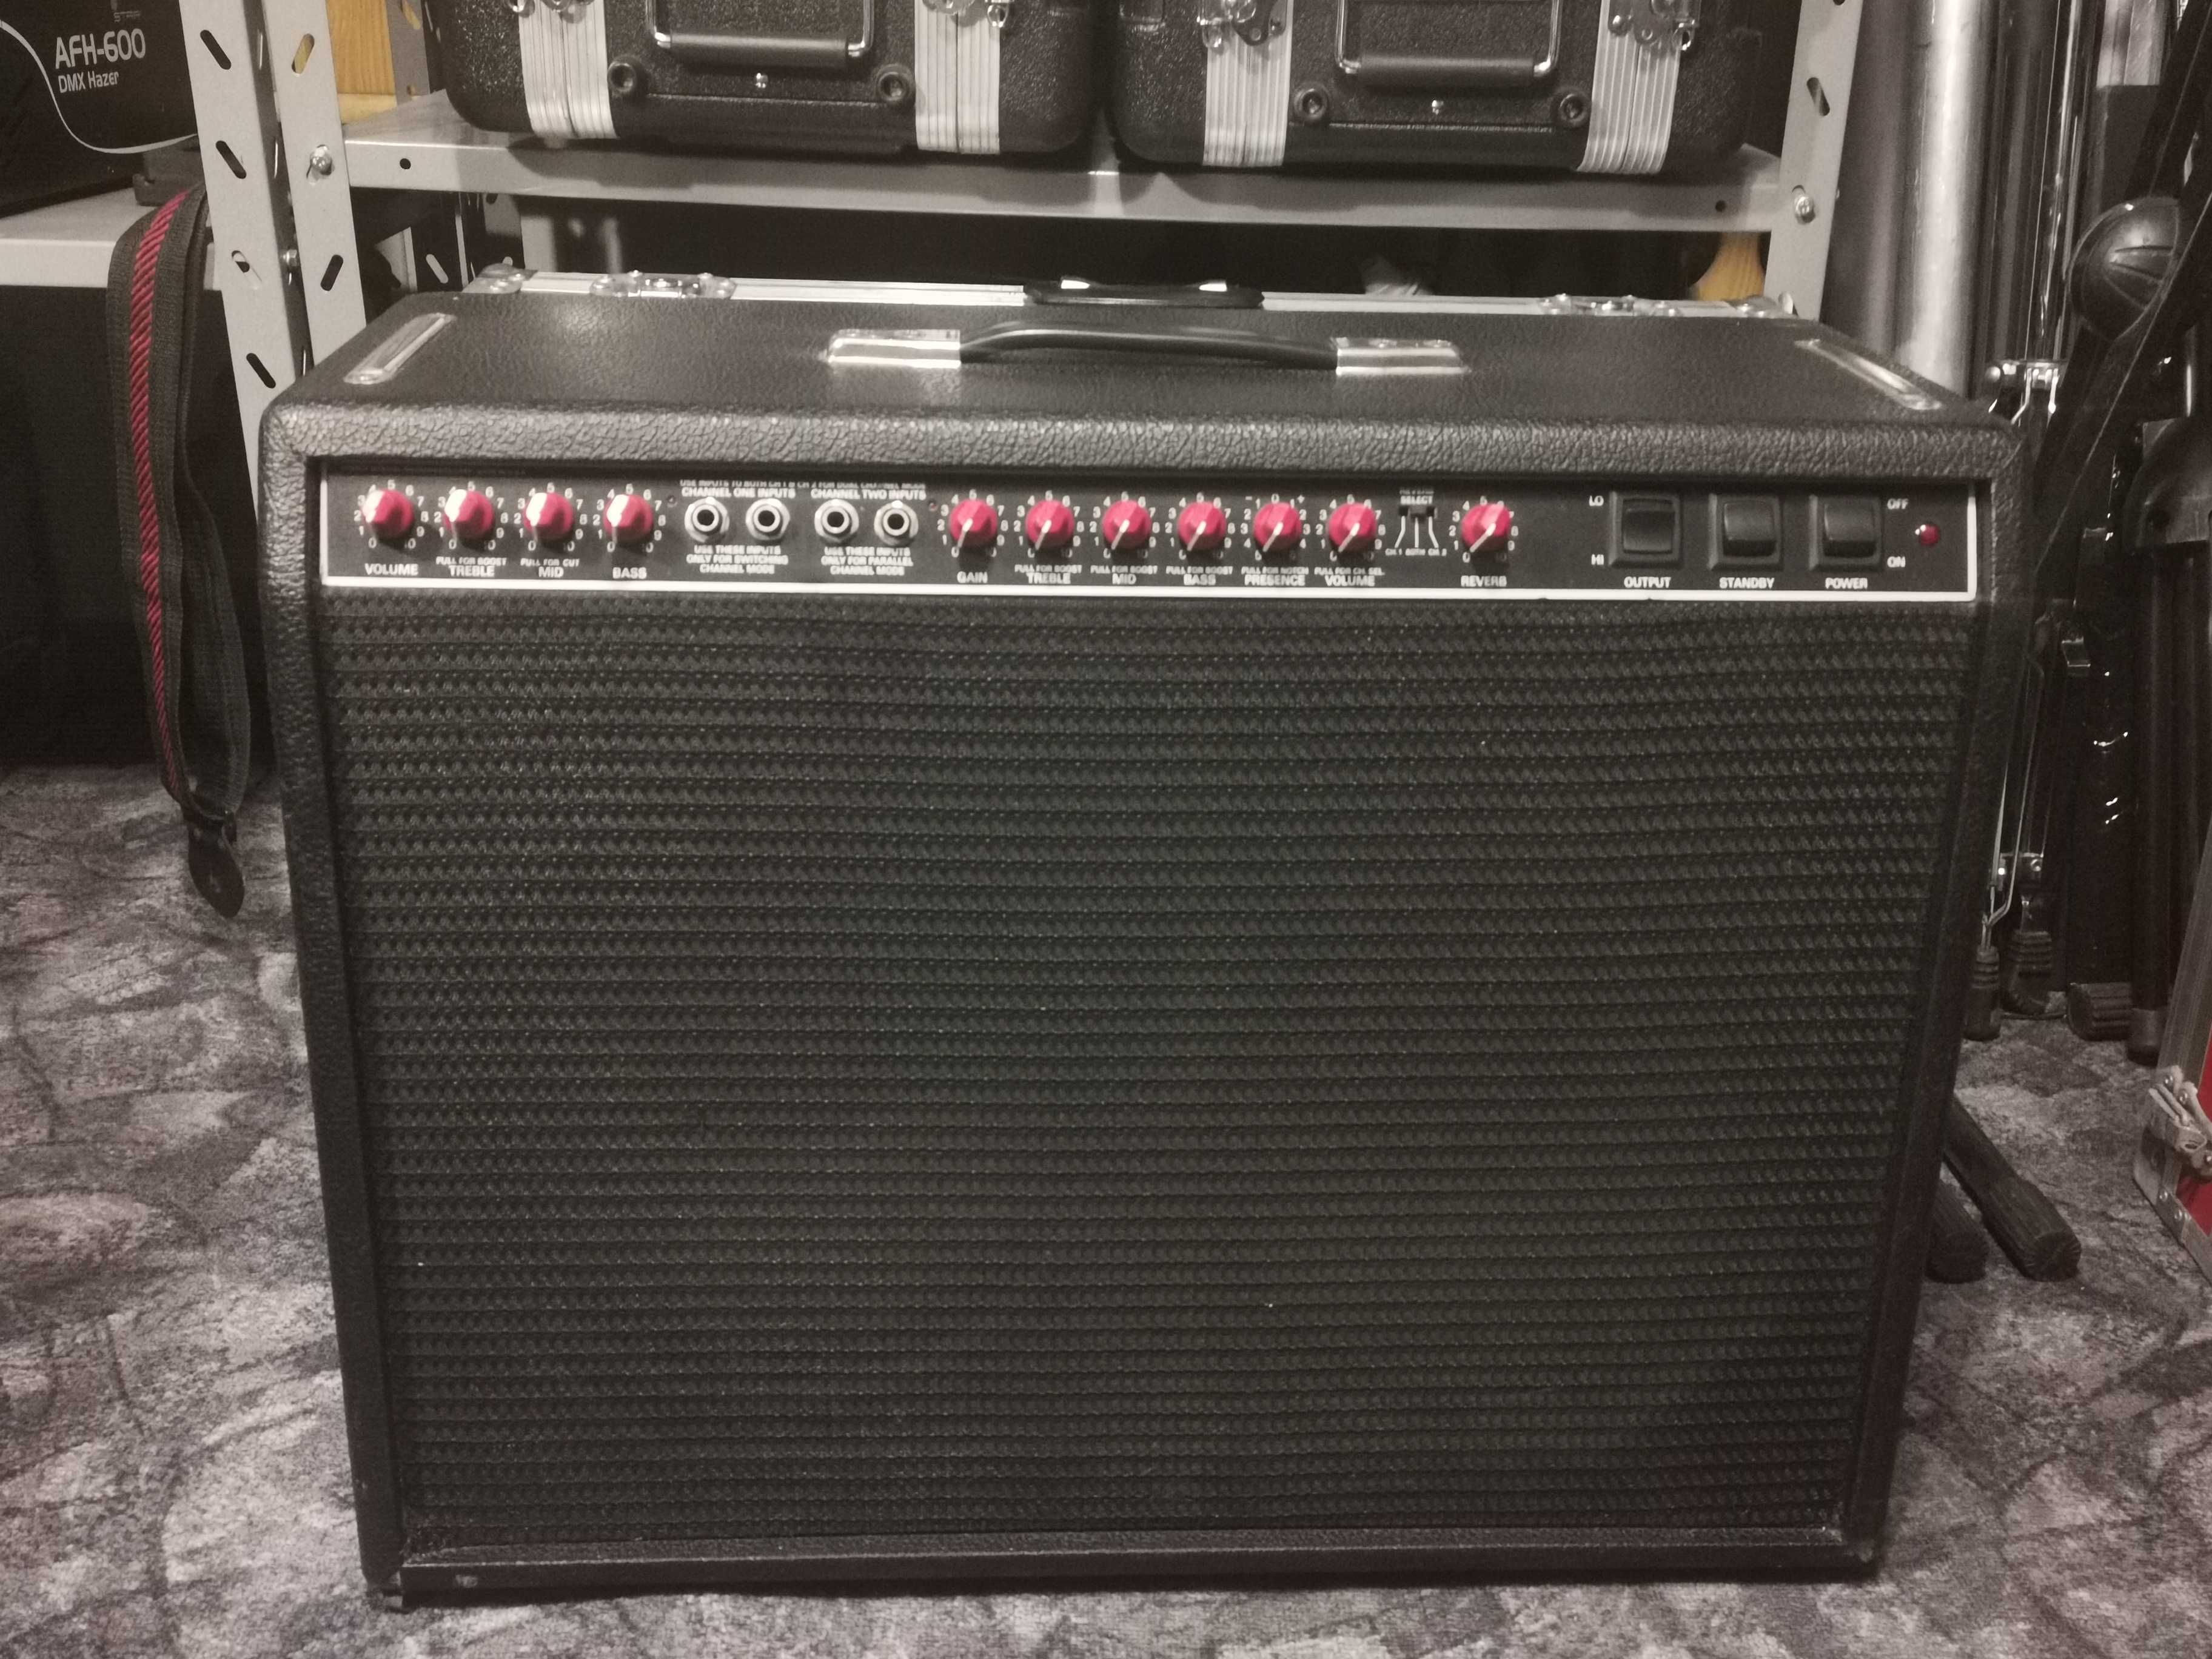 FENDER THE TWIN fotschwitch, case